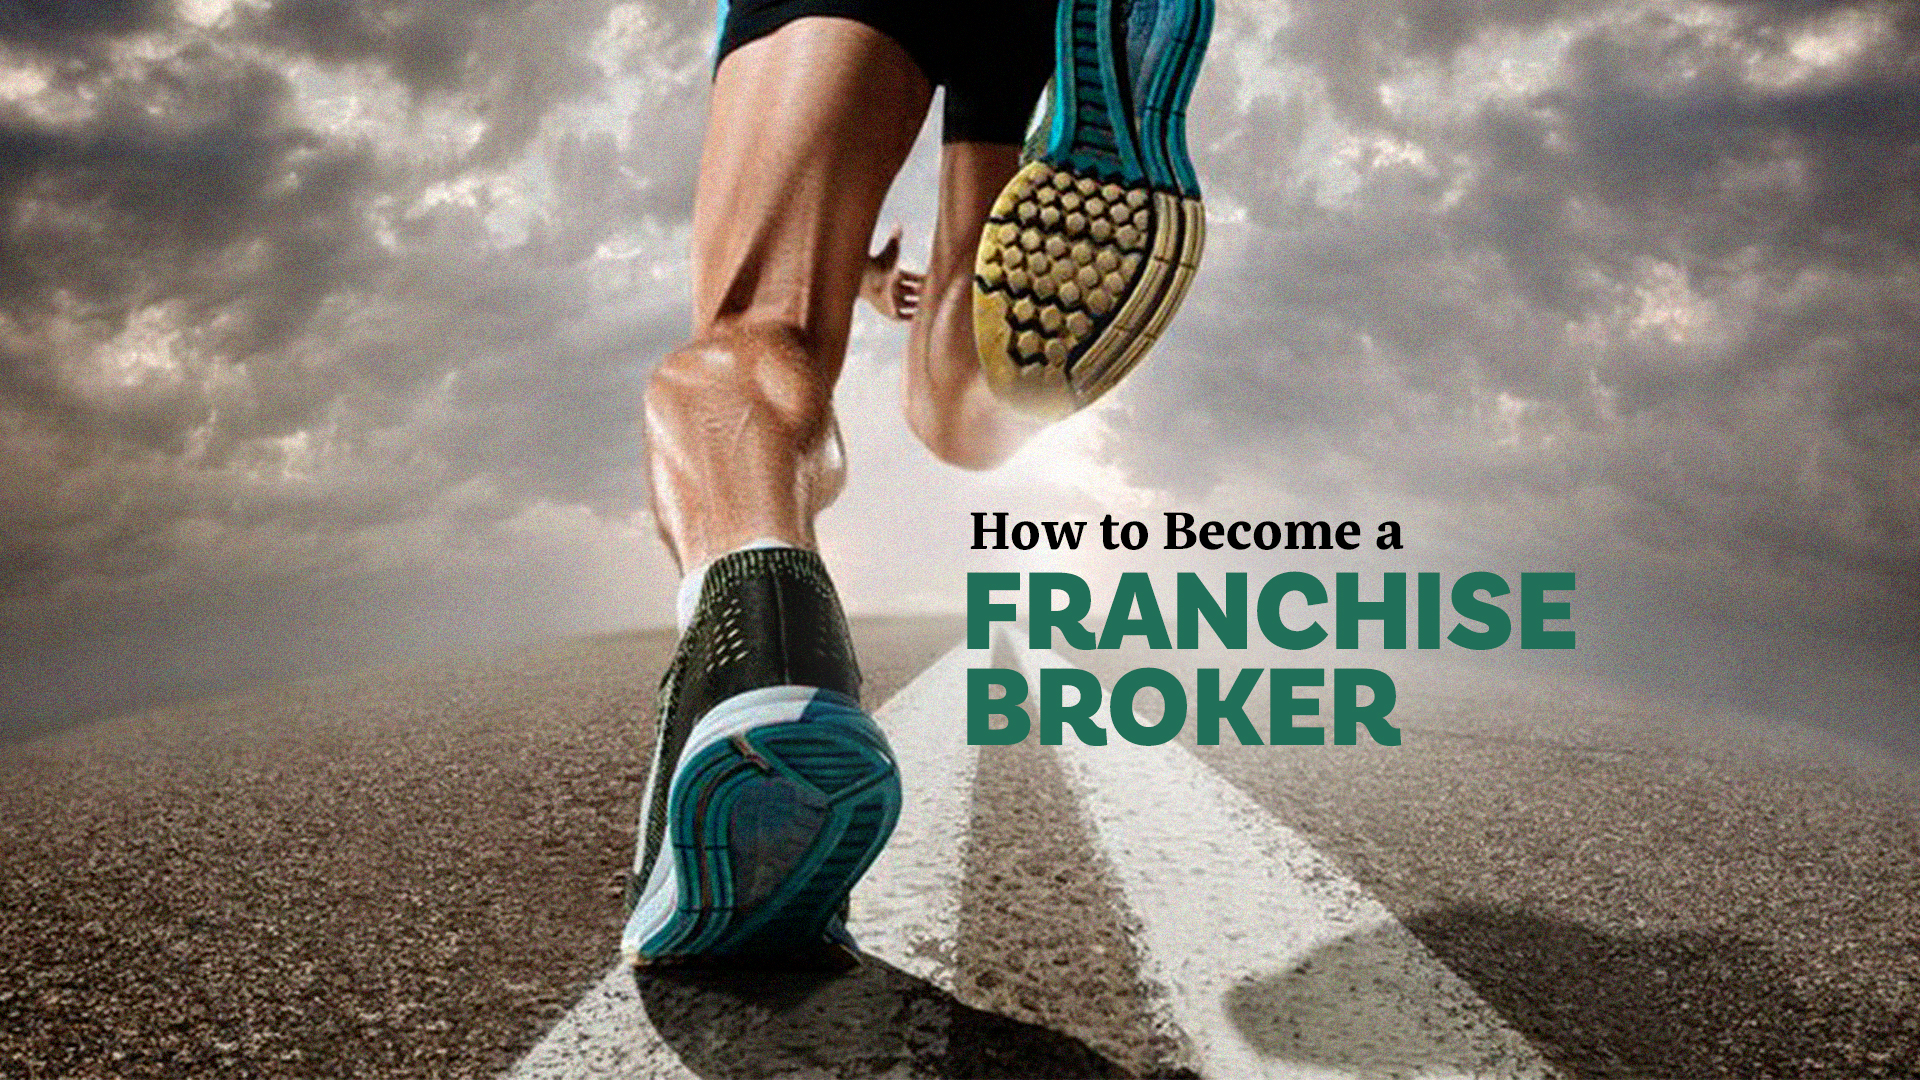 How to Become a Franchise Broker